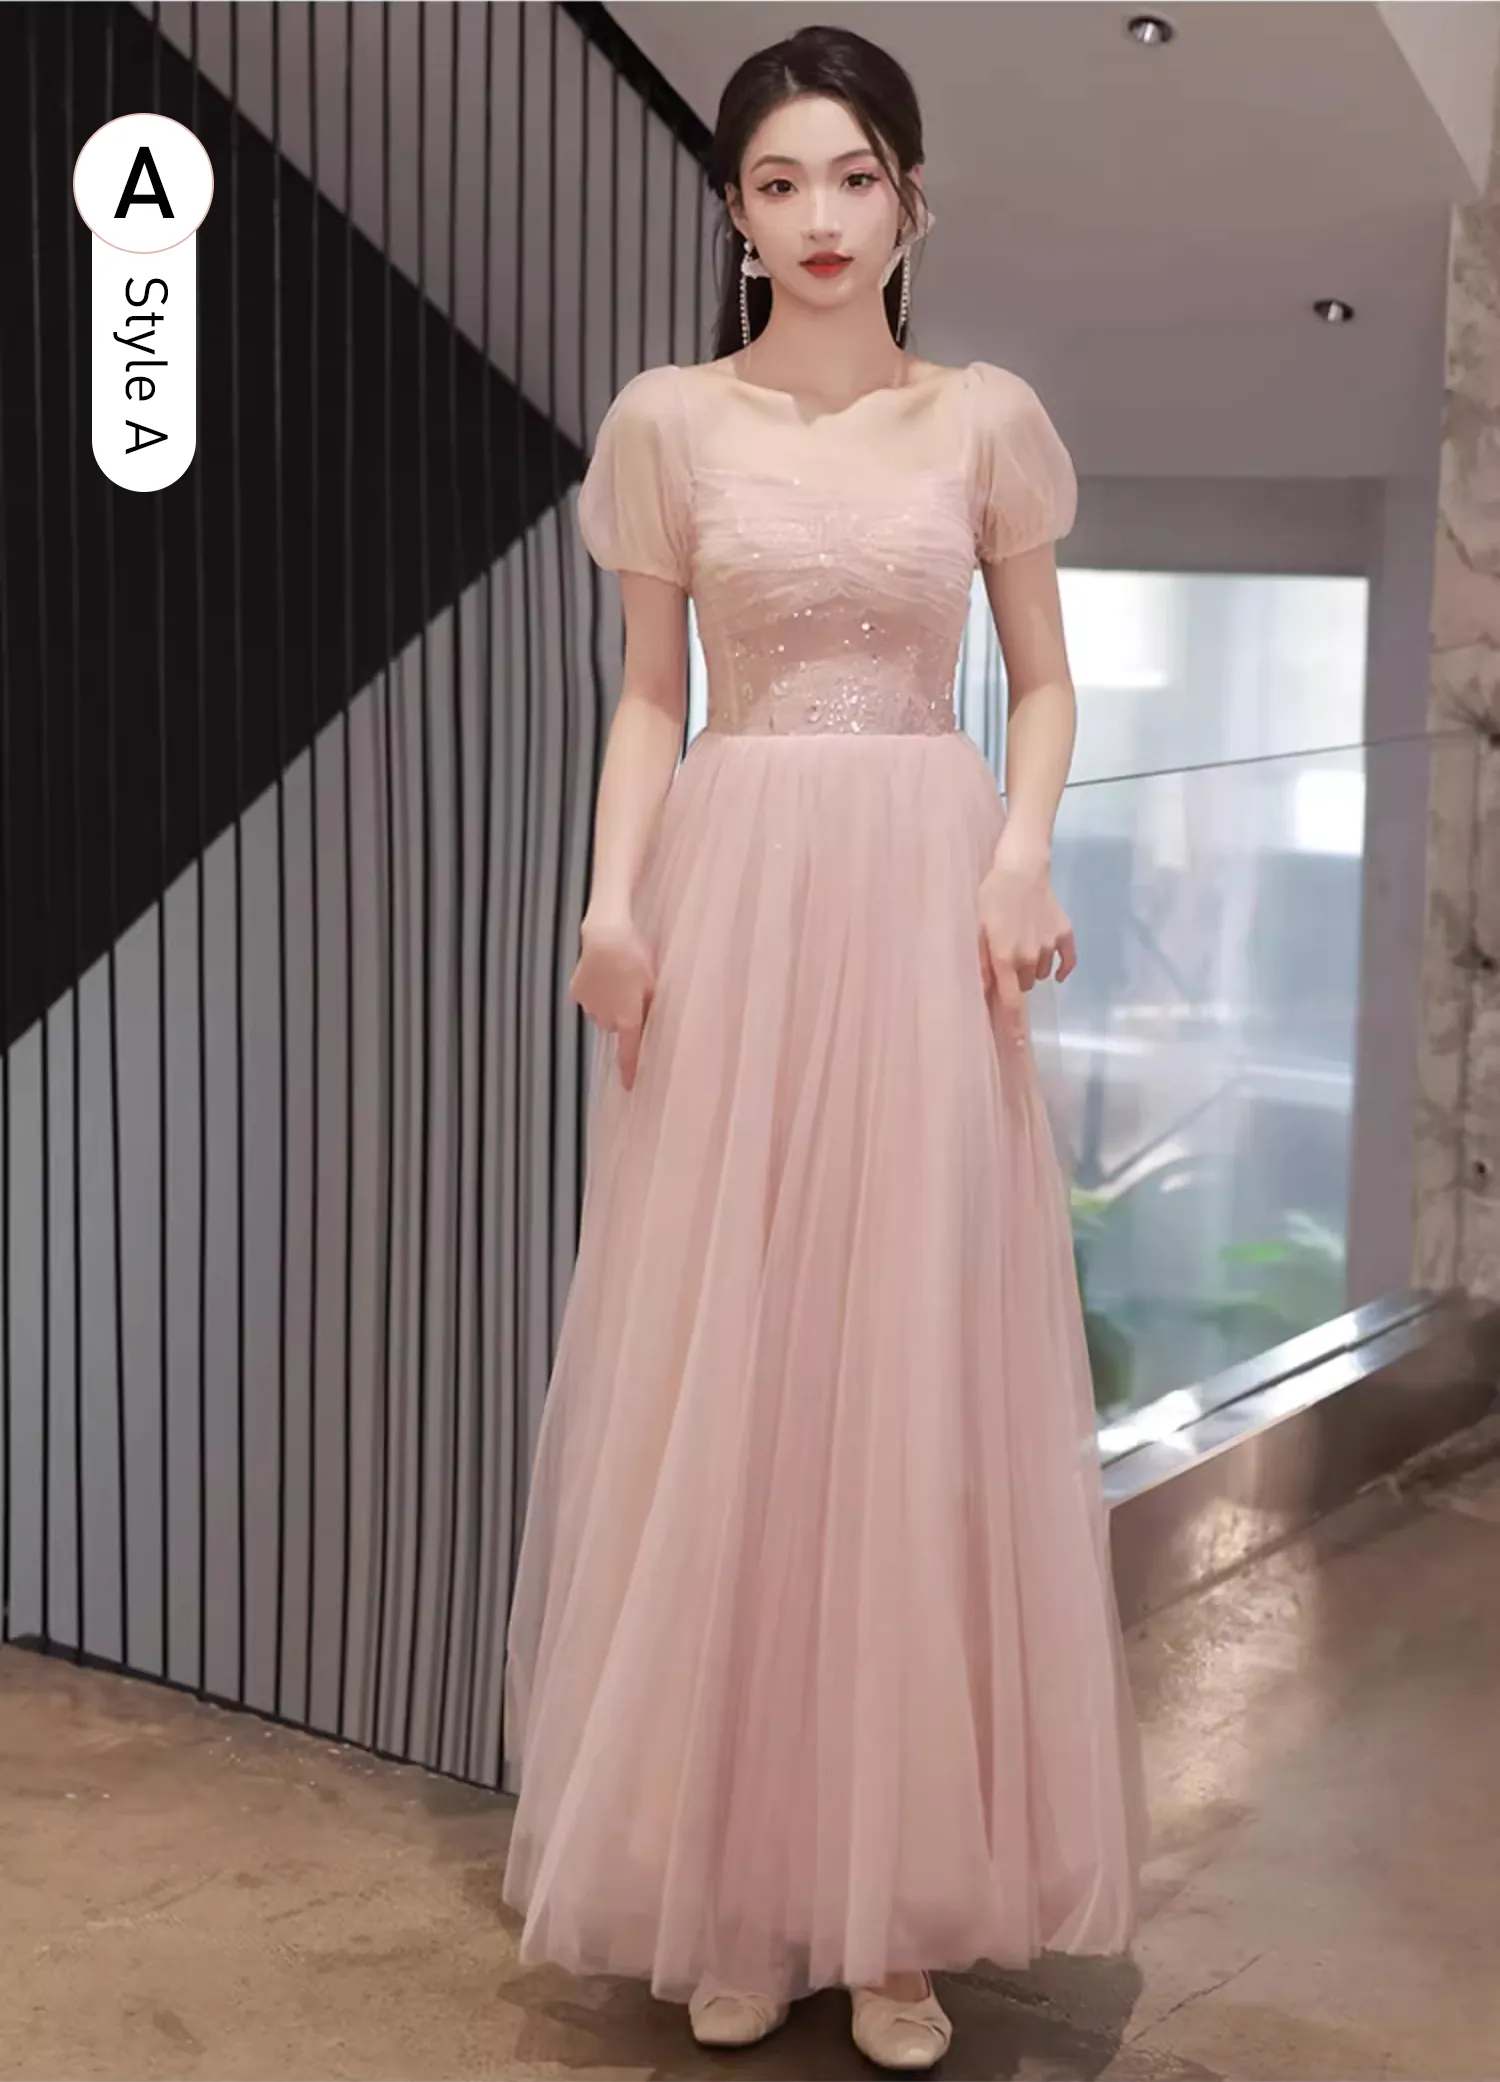 Trendy-Pink-Mesh-Chiffon-Bridesmaid-Maxi-Dress-Evening-Party-Gown13